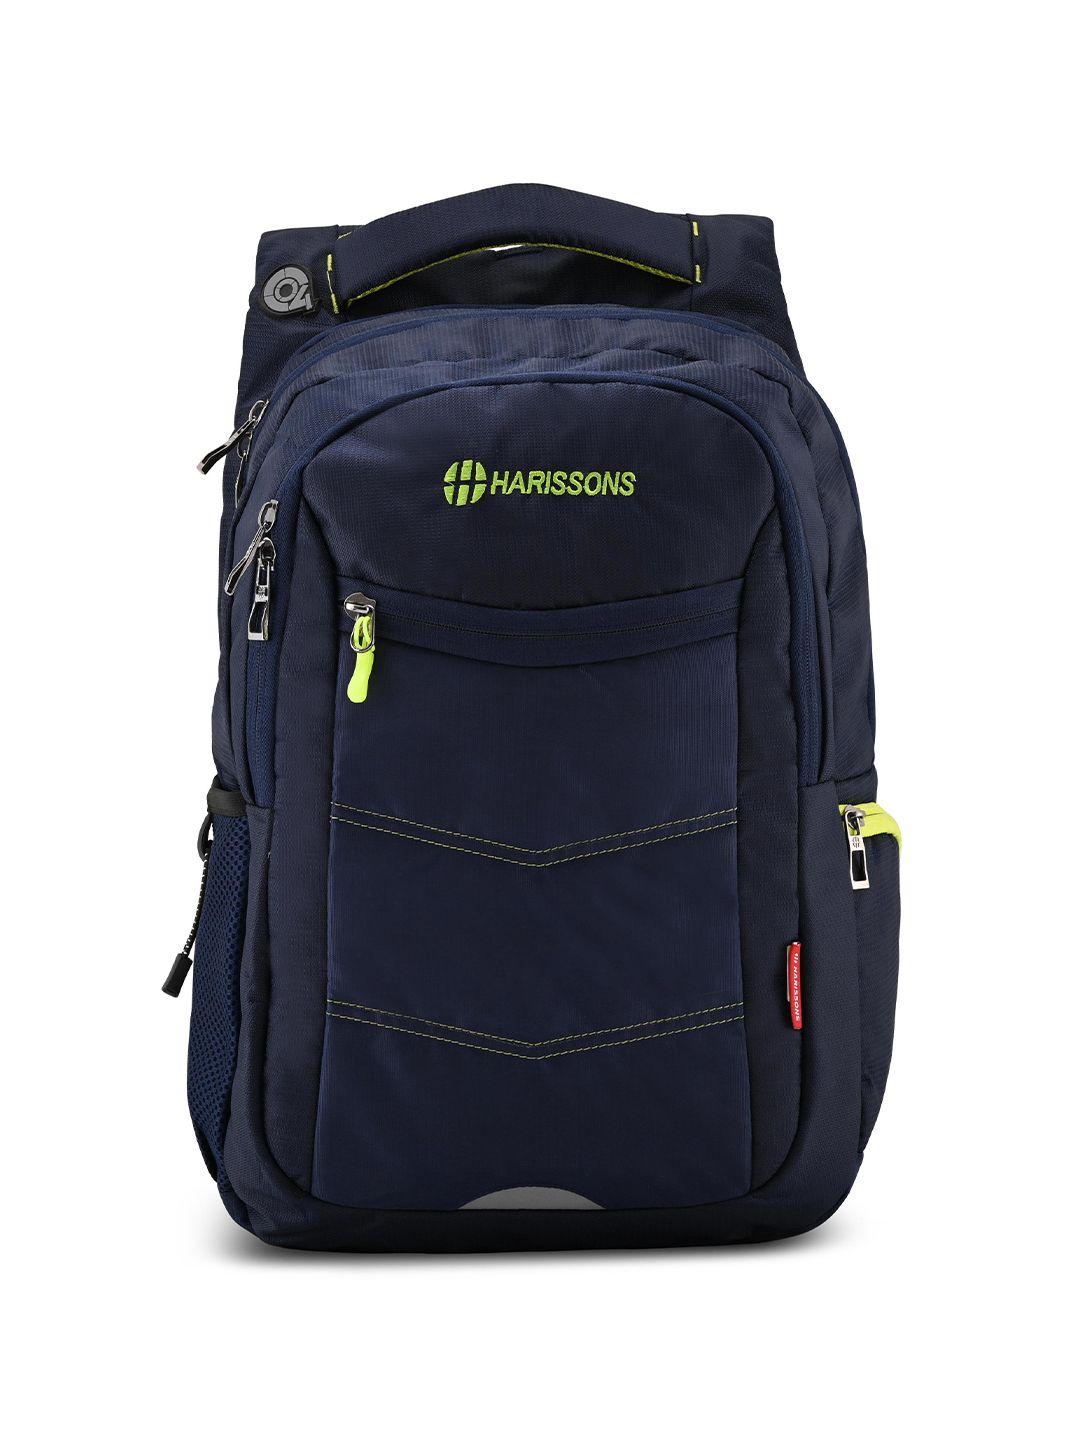 harissons unisex navy blue backpack with reflective strip